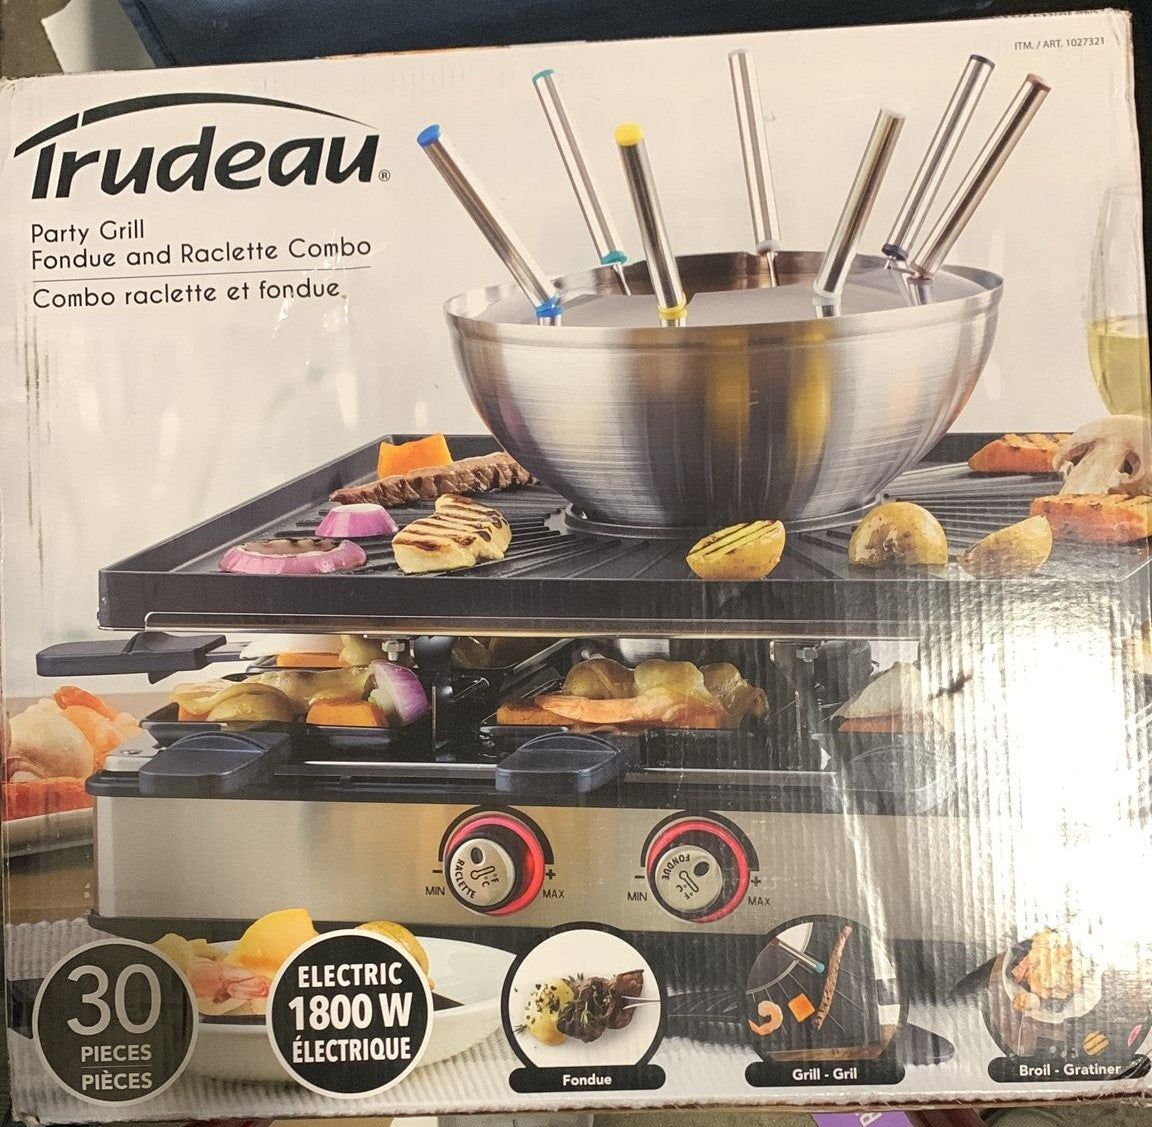 TRUDEAU PARTY GRILL